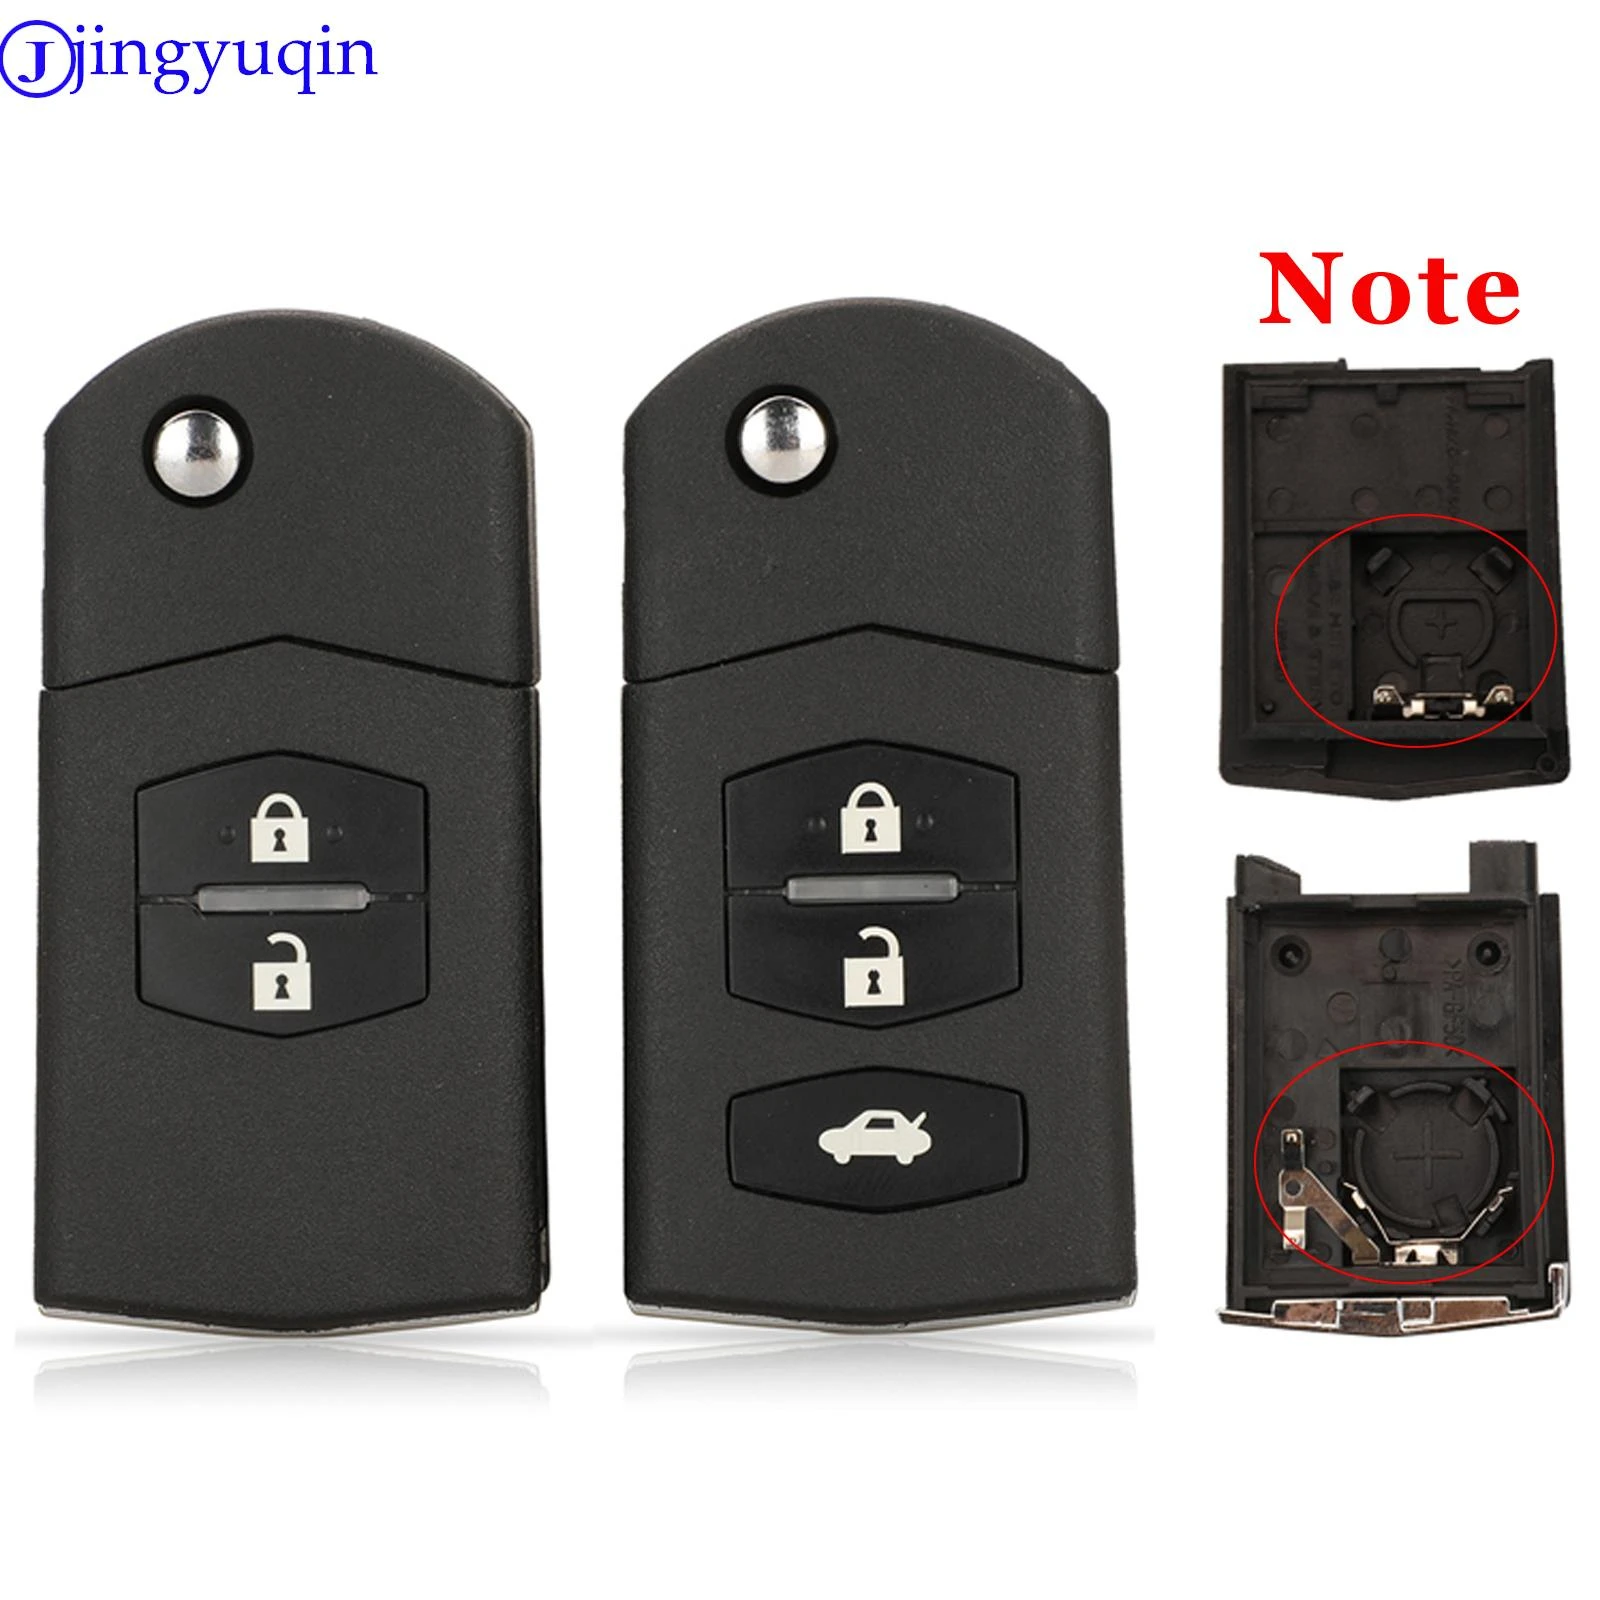 jingyuqin 2/3 Buttons Remote Folding Flip Car Key Fob Shell Cover Case For Mazda 3 5 6 Uncut Blade With Battery Holder